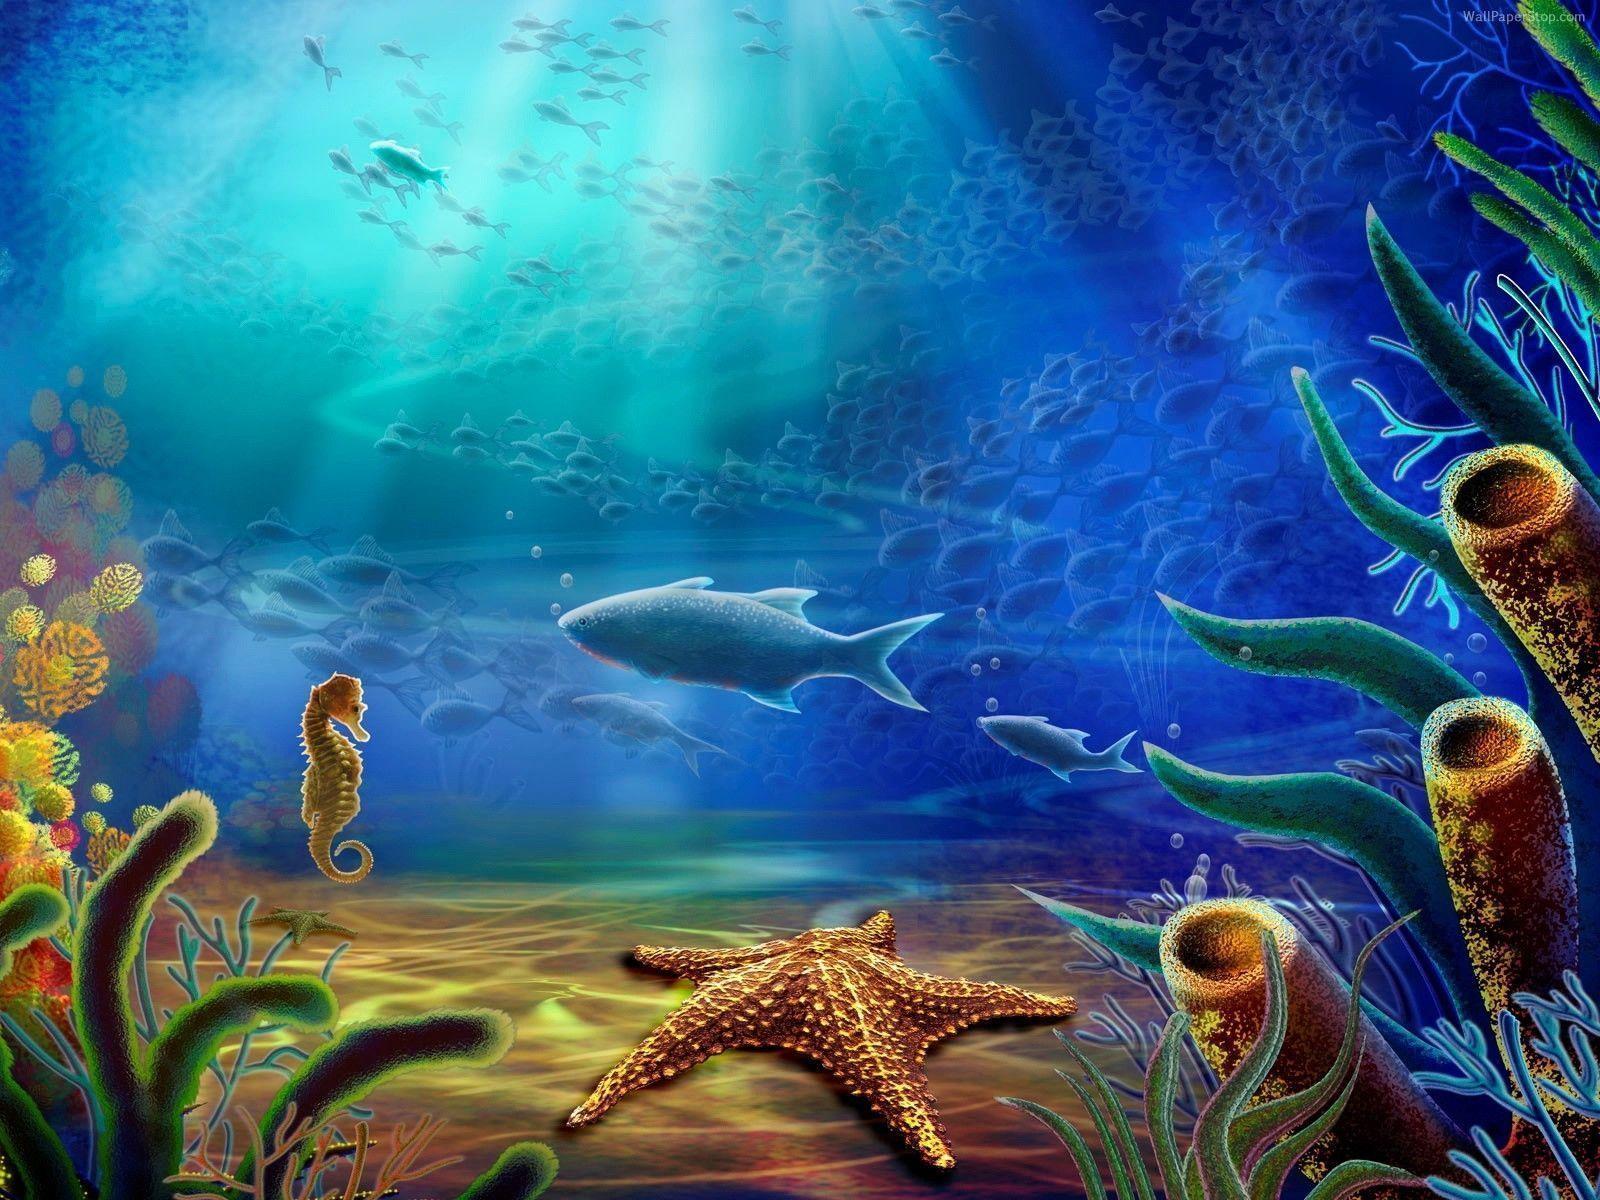 Under Water 3D View wallpapers HD full hd for Mobile, Desktop